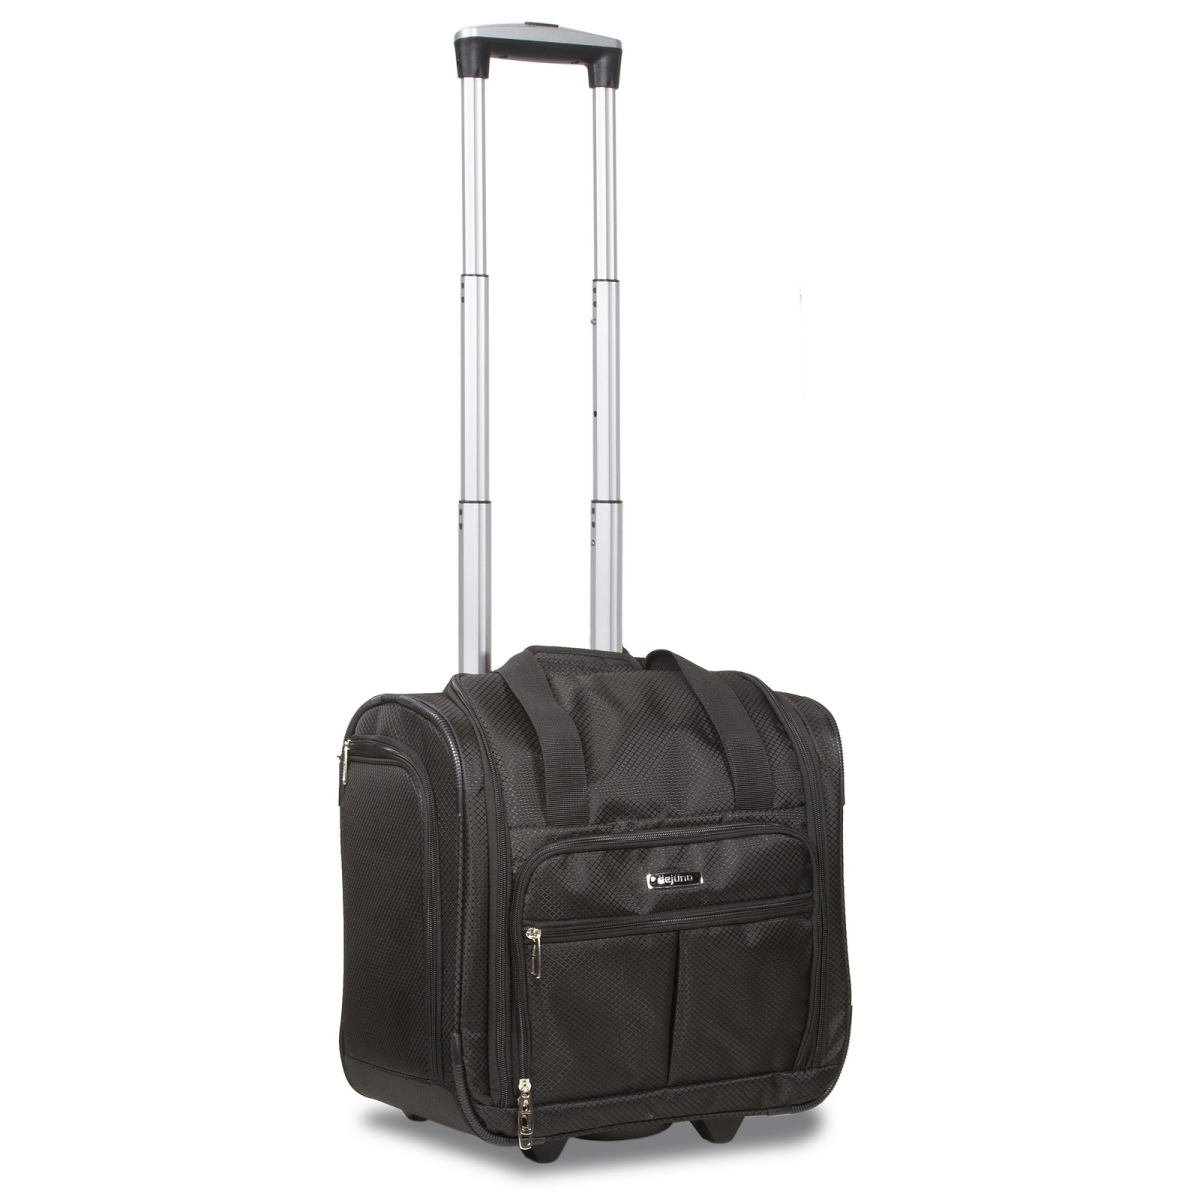 25prt-15sb 15 In. Lightweight Wheeled Underseater Carry-on Luggage, Black